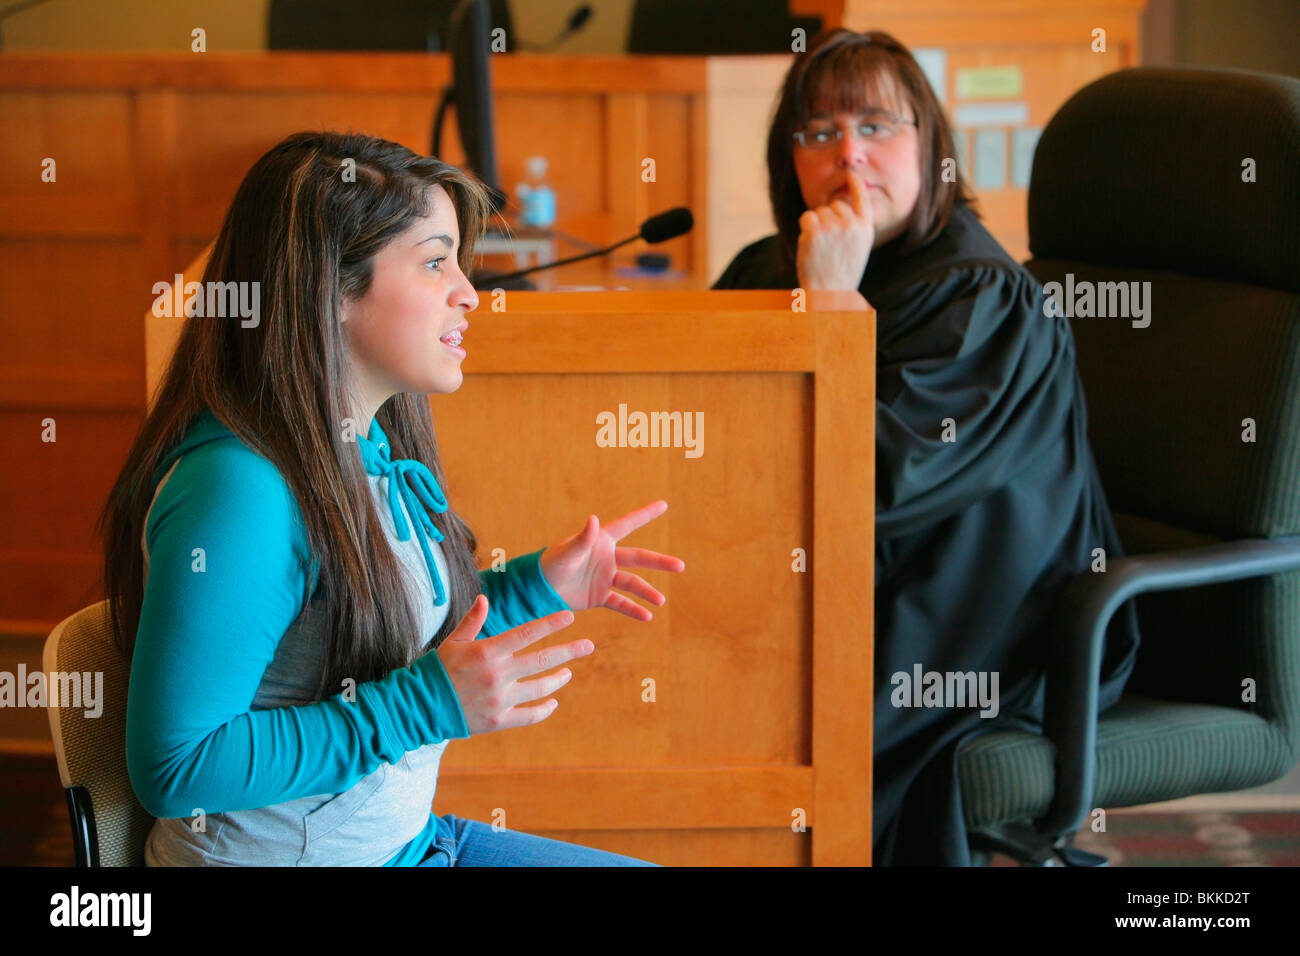 A Teenage Girl Giving Her Testimony Before A Judge Stock Photo